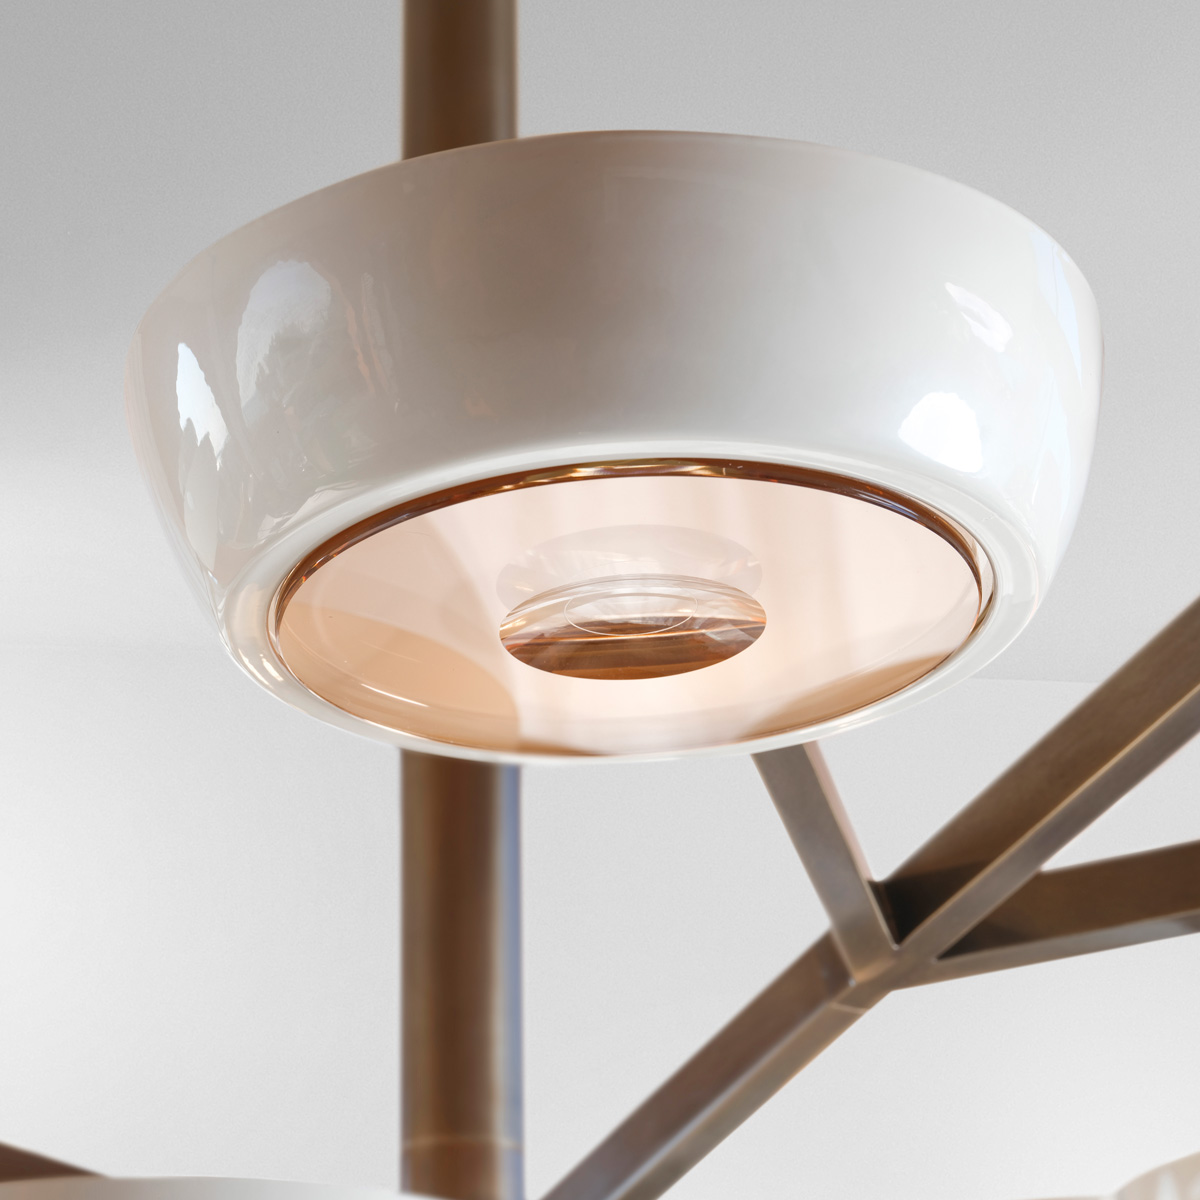 rose grande ceiling light by gaspare asaro